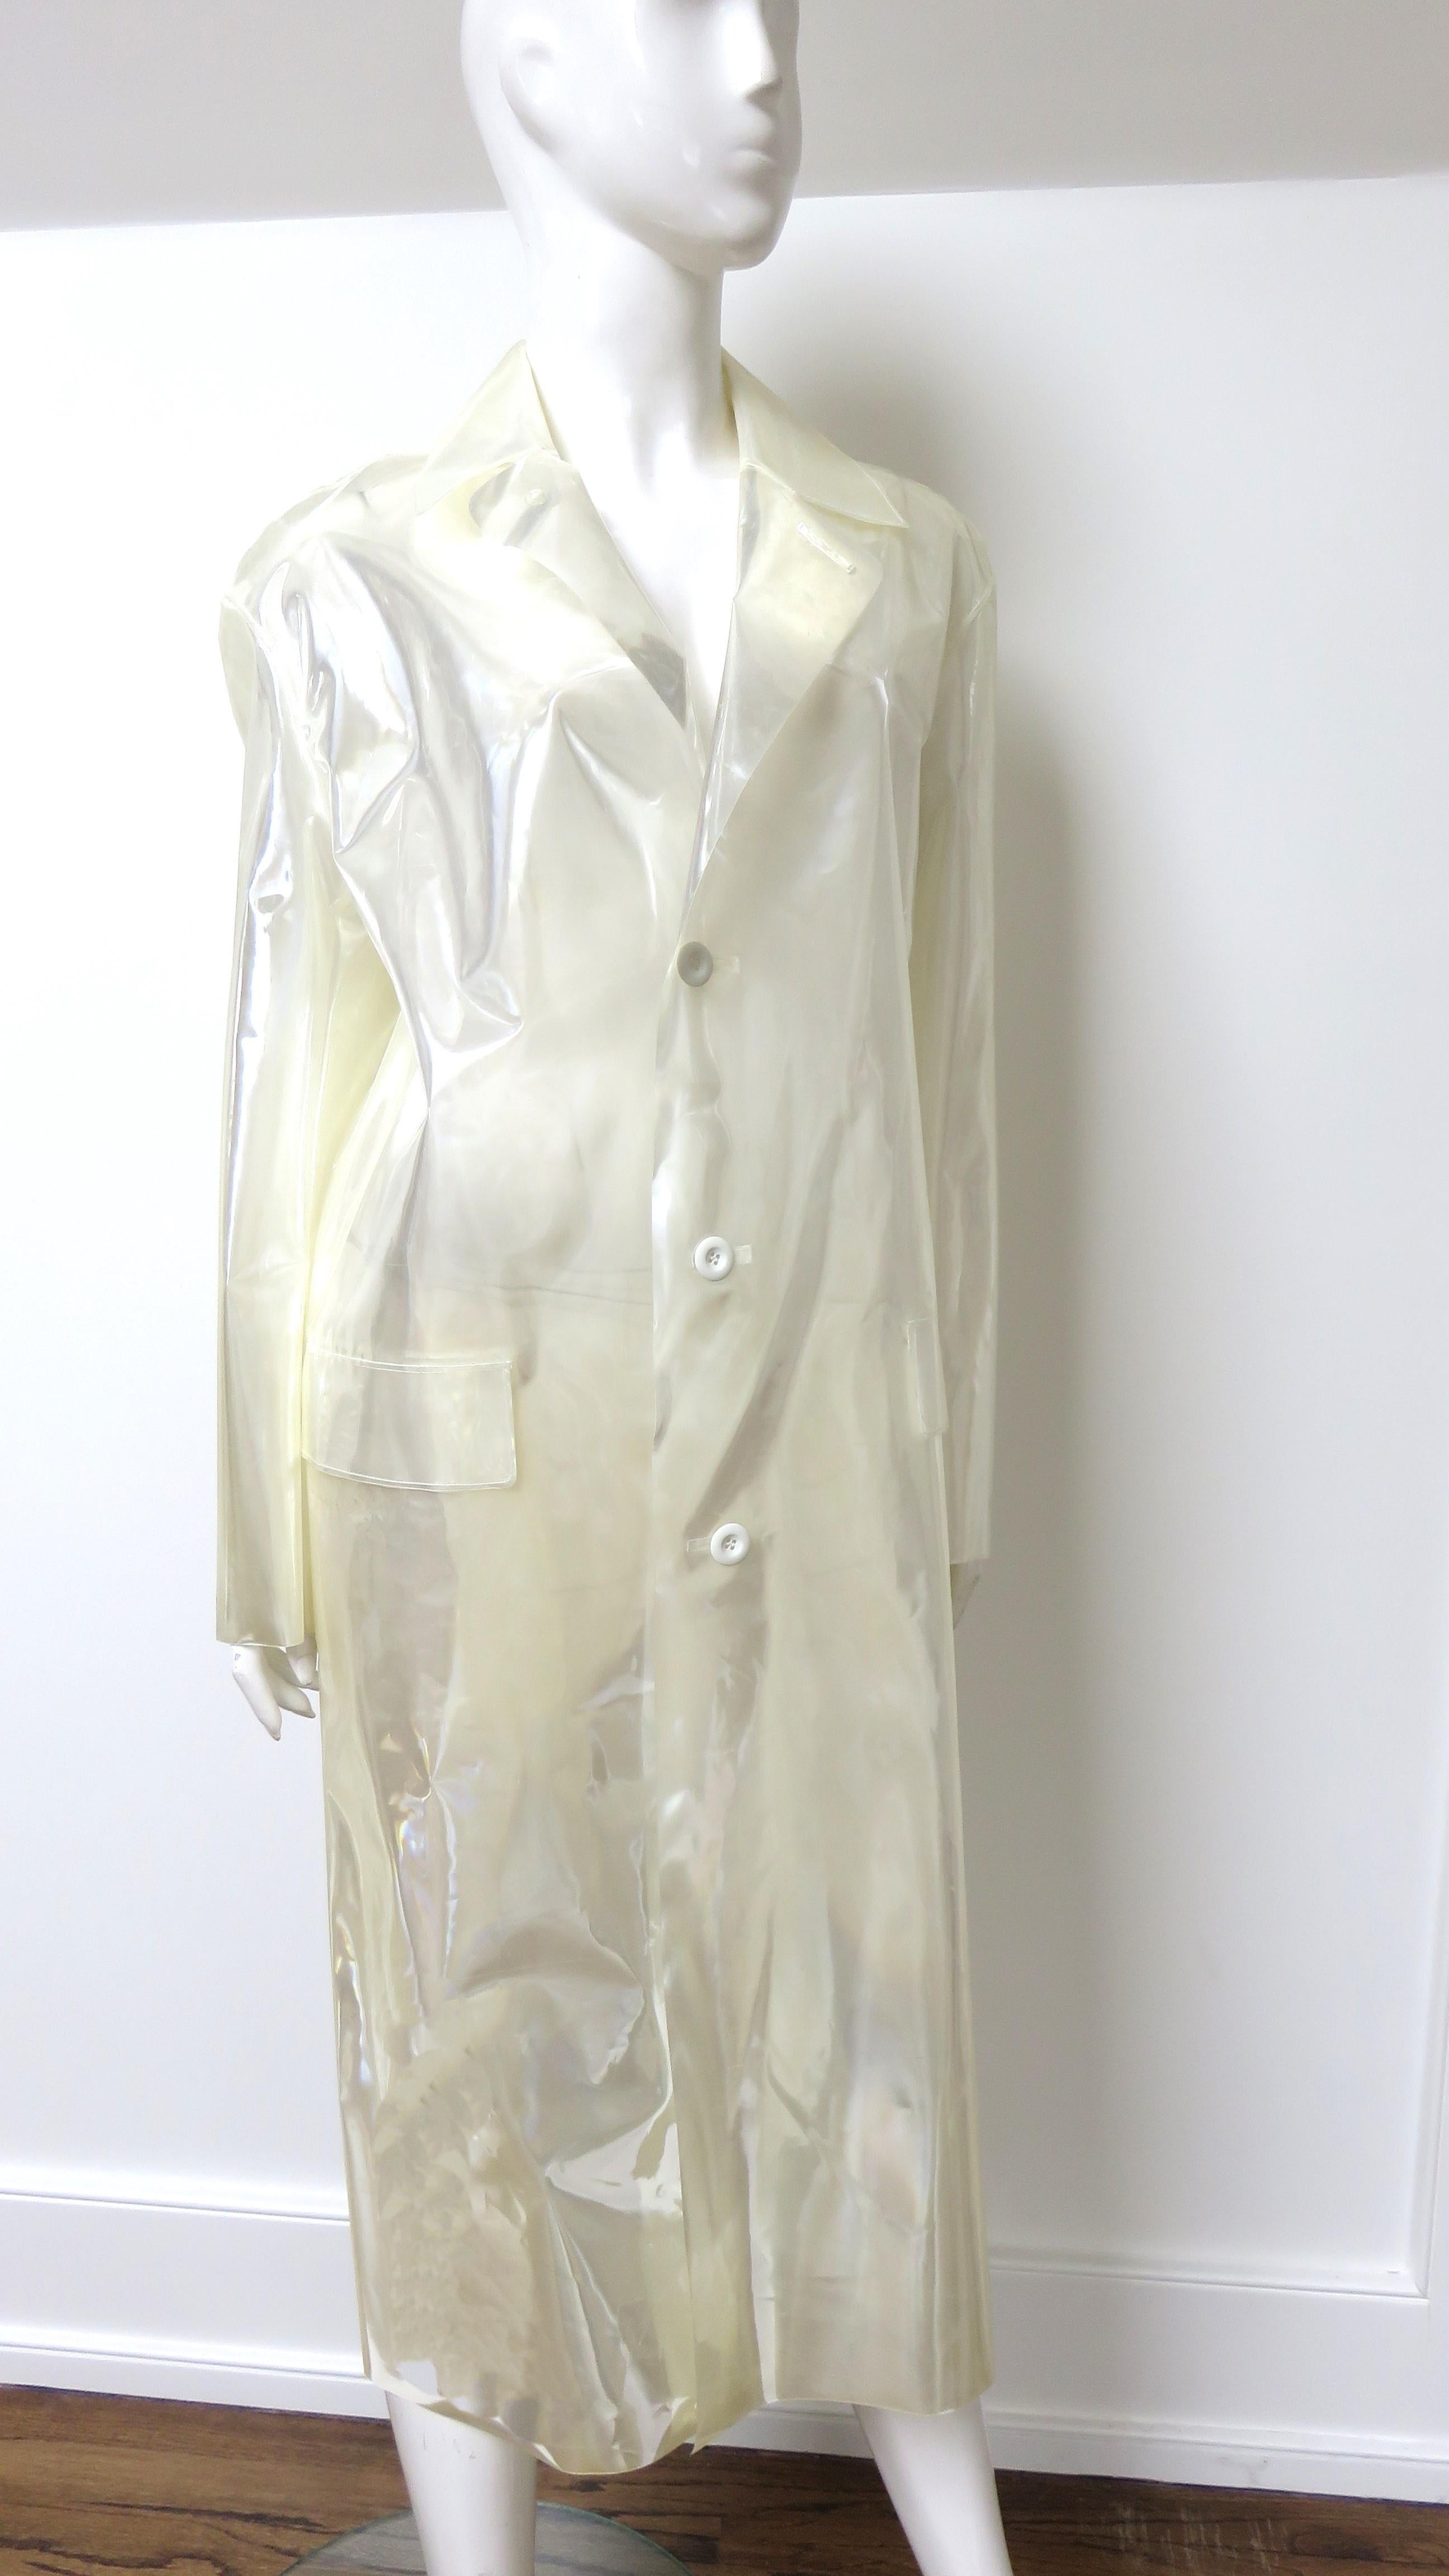 A fabulous new translucent, white reflective polyurethane plastic raincoat from Maison Margiela S/S 2018 collection. It was difficult to capture the beautiful white reflectiveness in photos, it has a lapel collar which can be buttoned closed at the